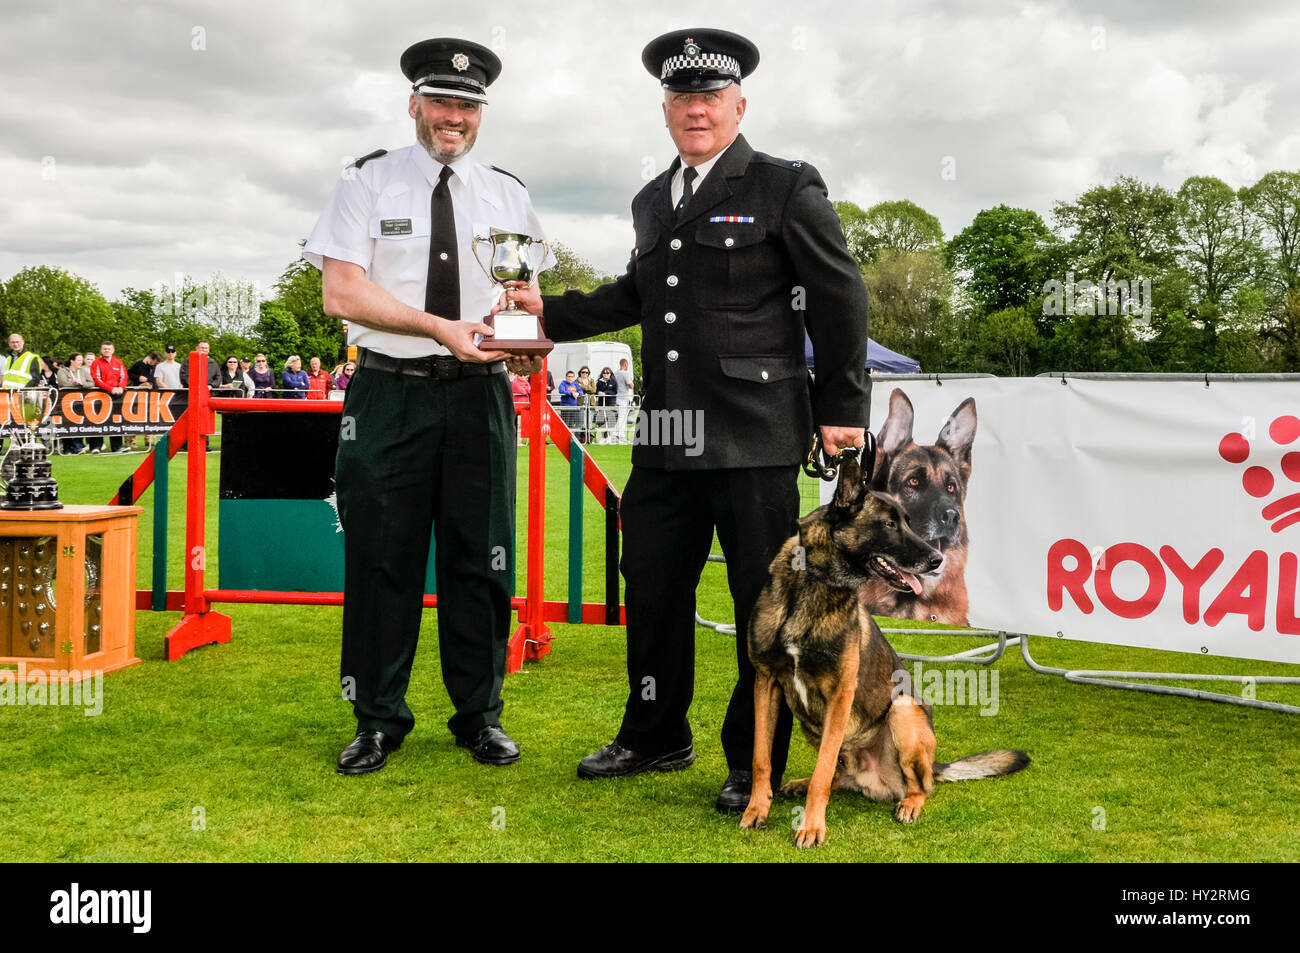 BELFAST, NORTHERN IRELAND. 22 MAY 2016 - PD Evo from Humberside Police, with his handler Constable Noble, receives 3rd place in the 56th UK National Police Dog Trials which took place in Belfast this weekend. Stock Photo